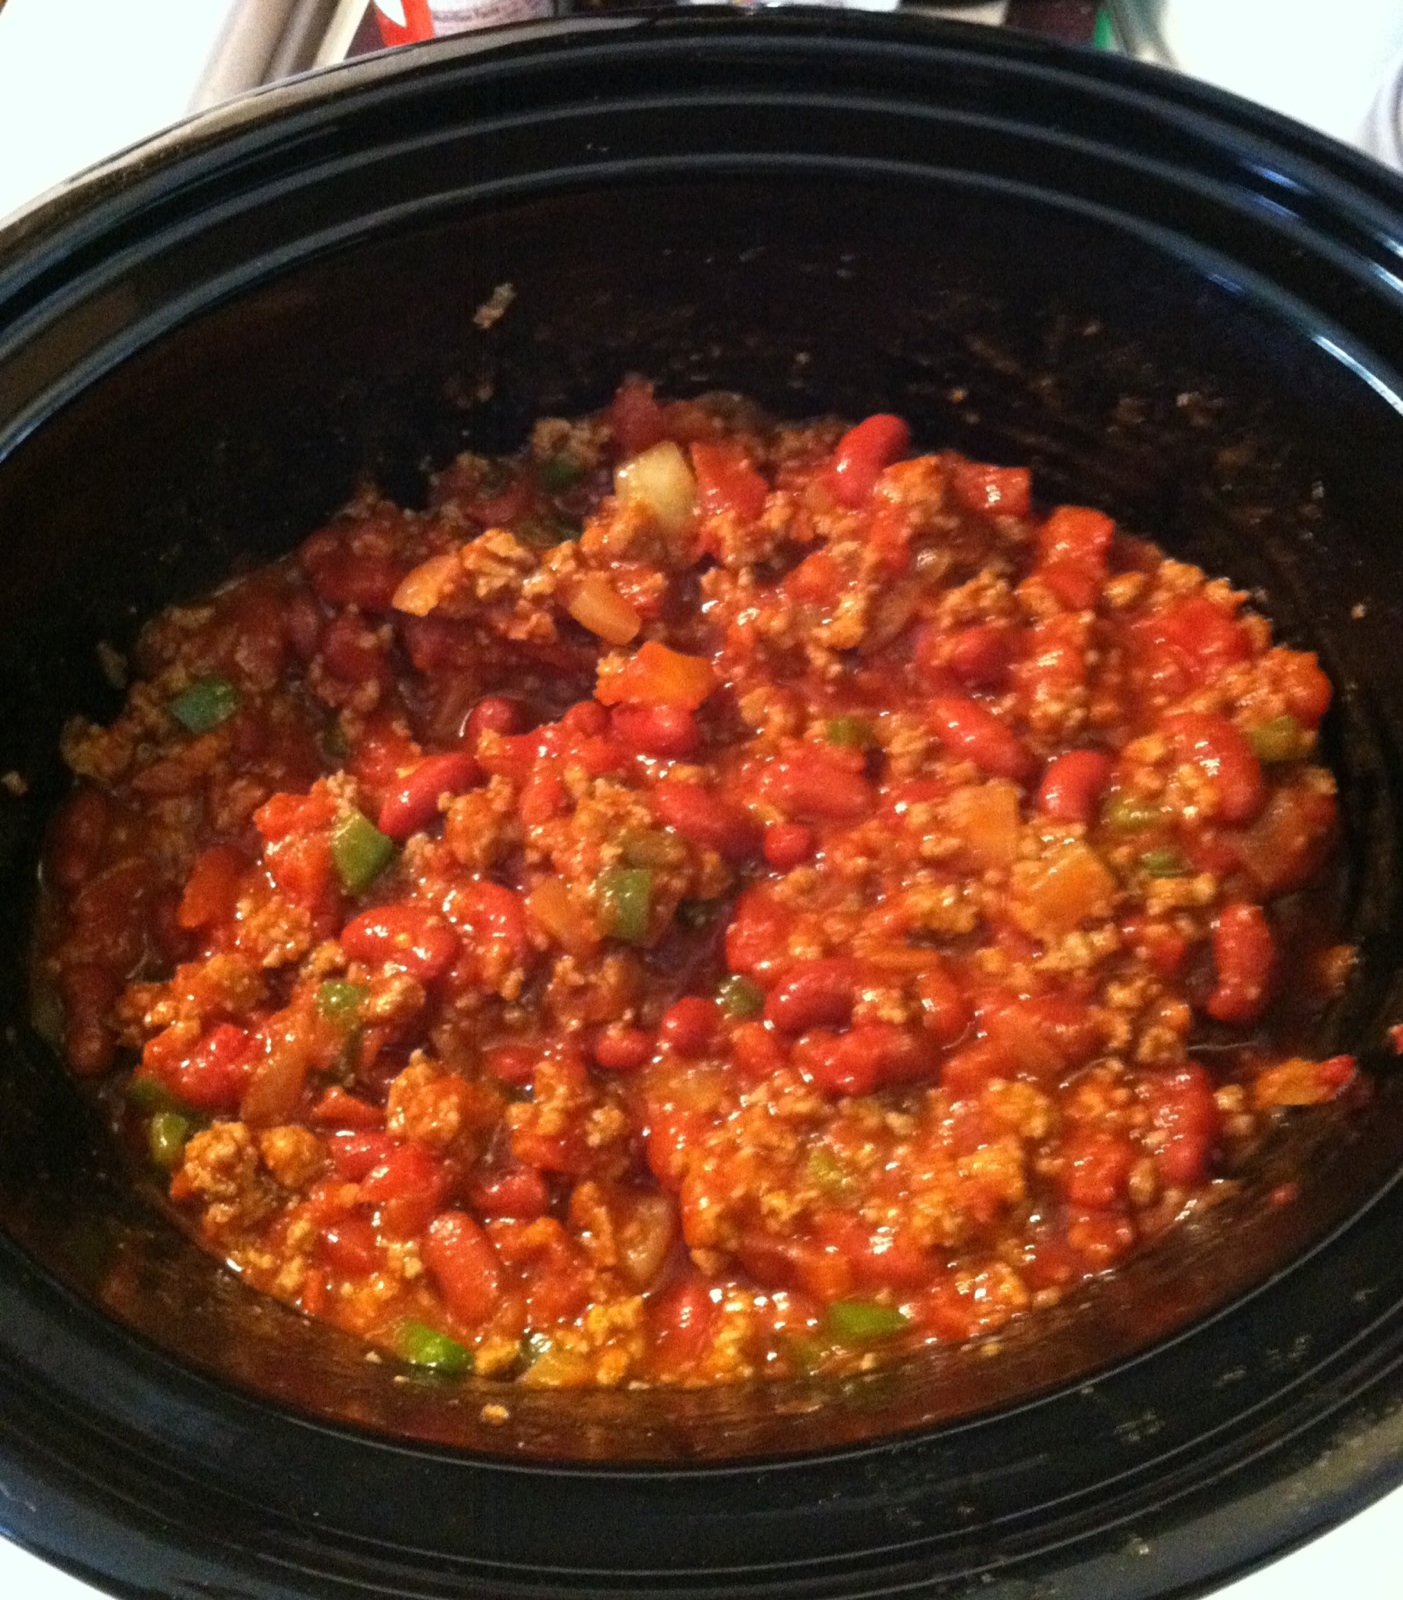 Our Favorite Slow Cooker Turkey Chili